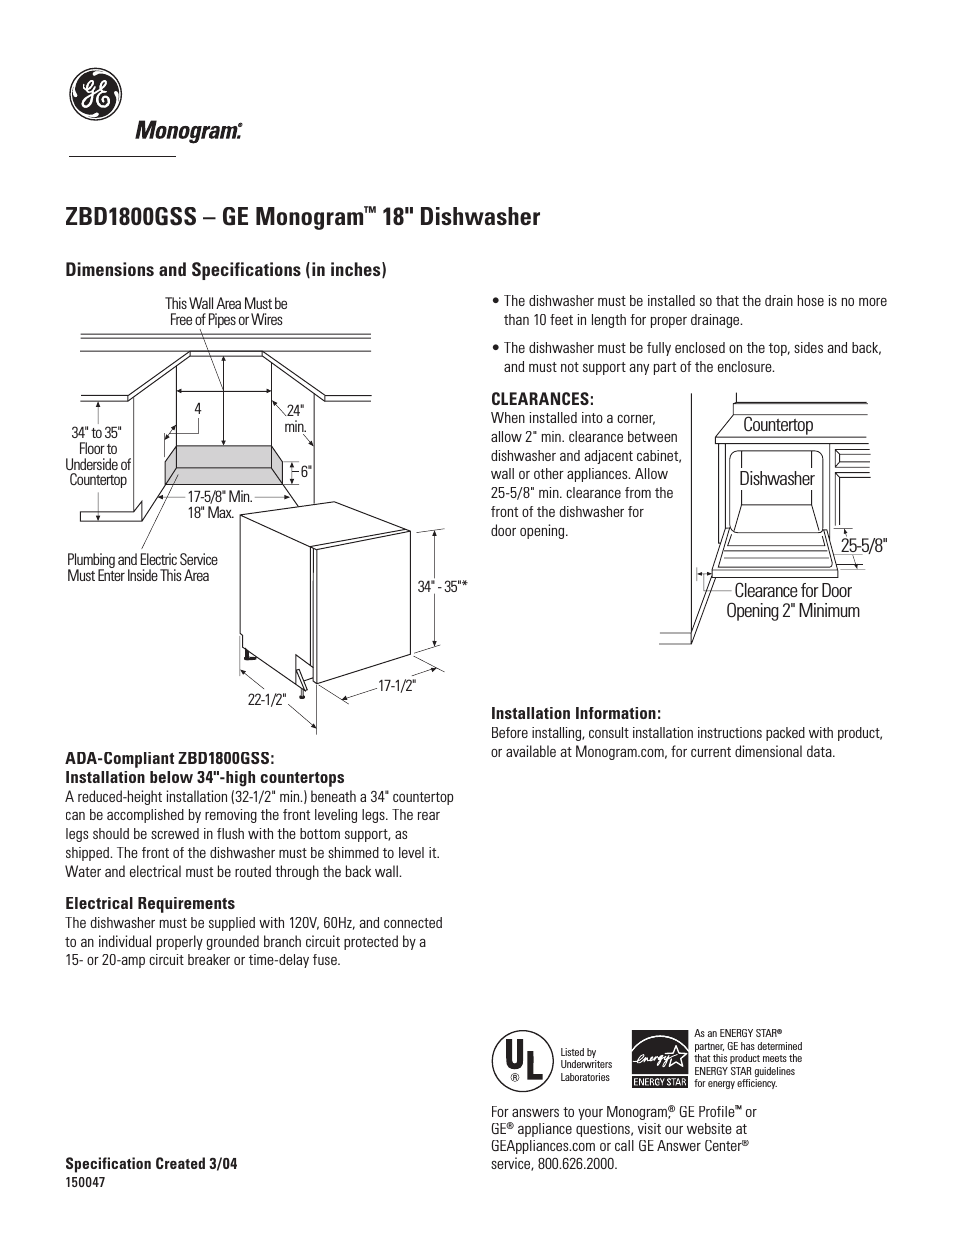 MONOGRAM ZBD1800GSS (Page 1)